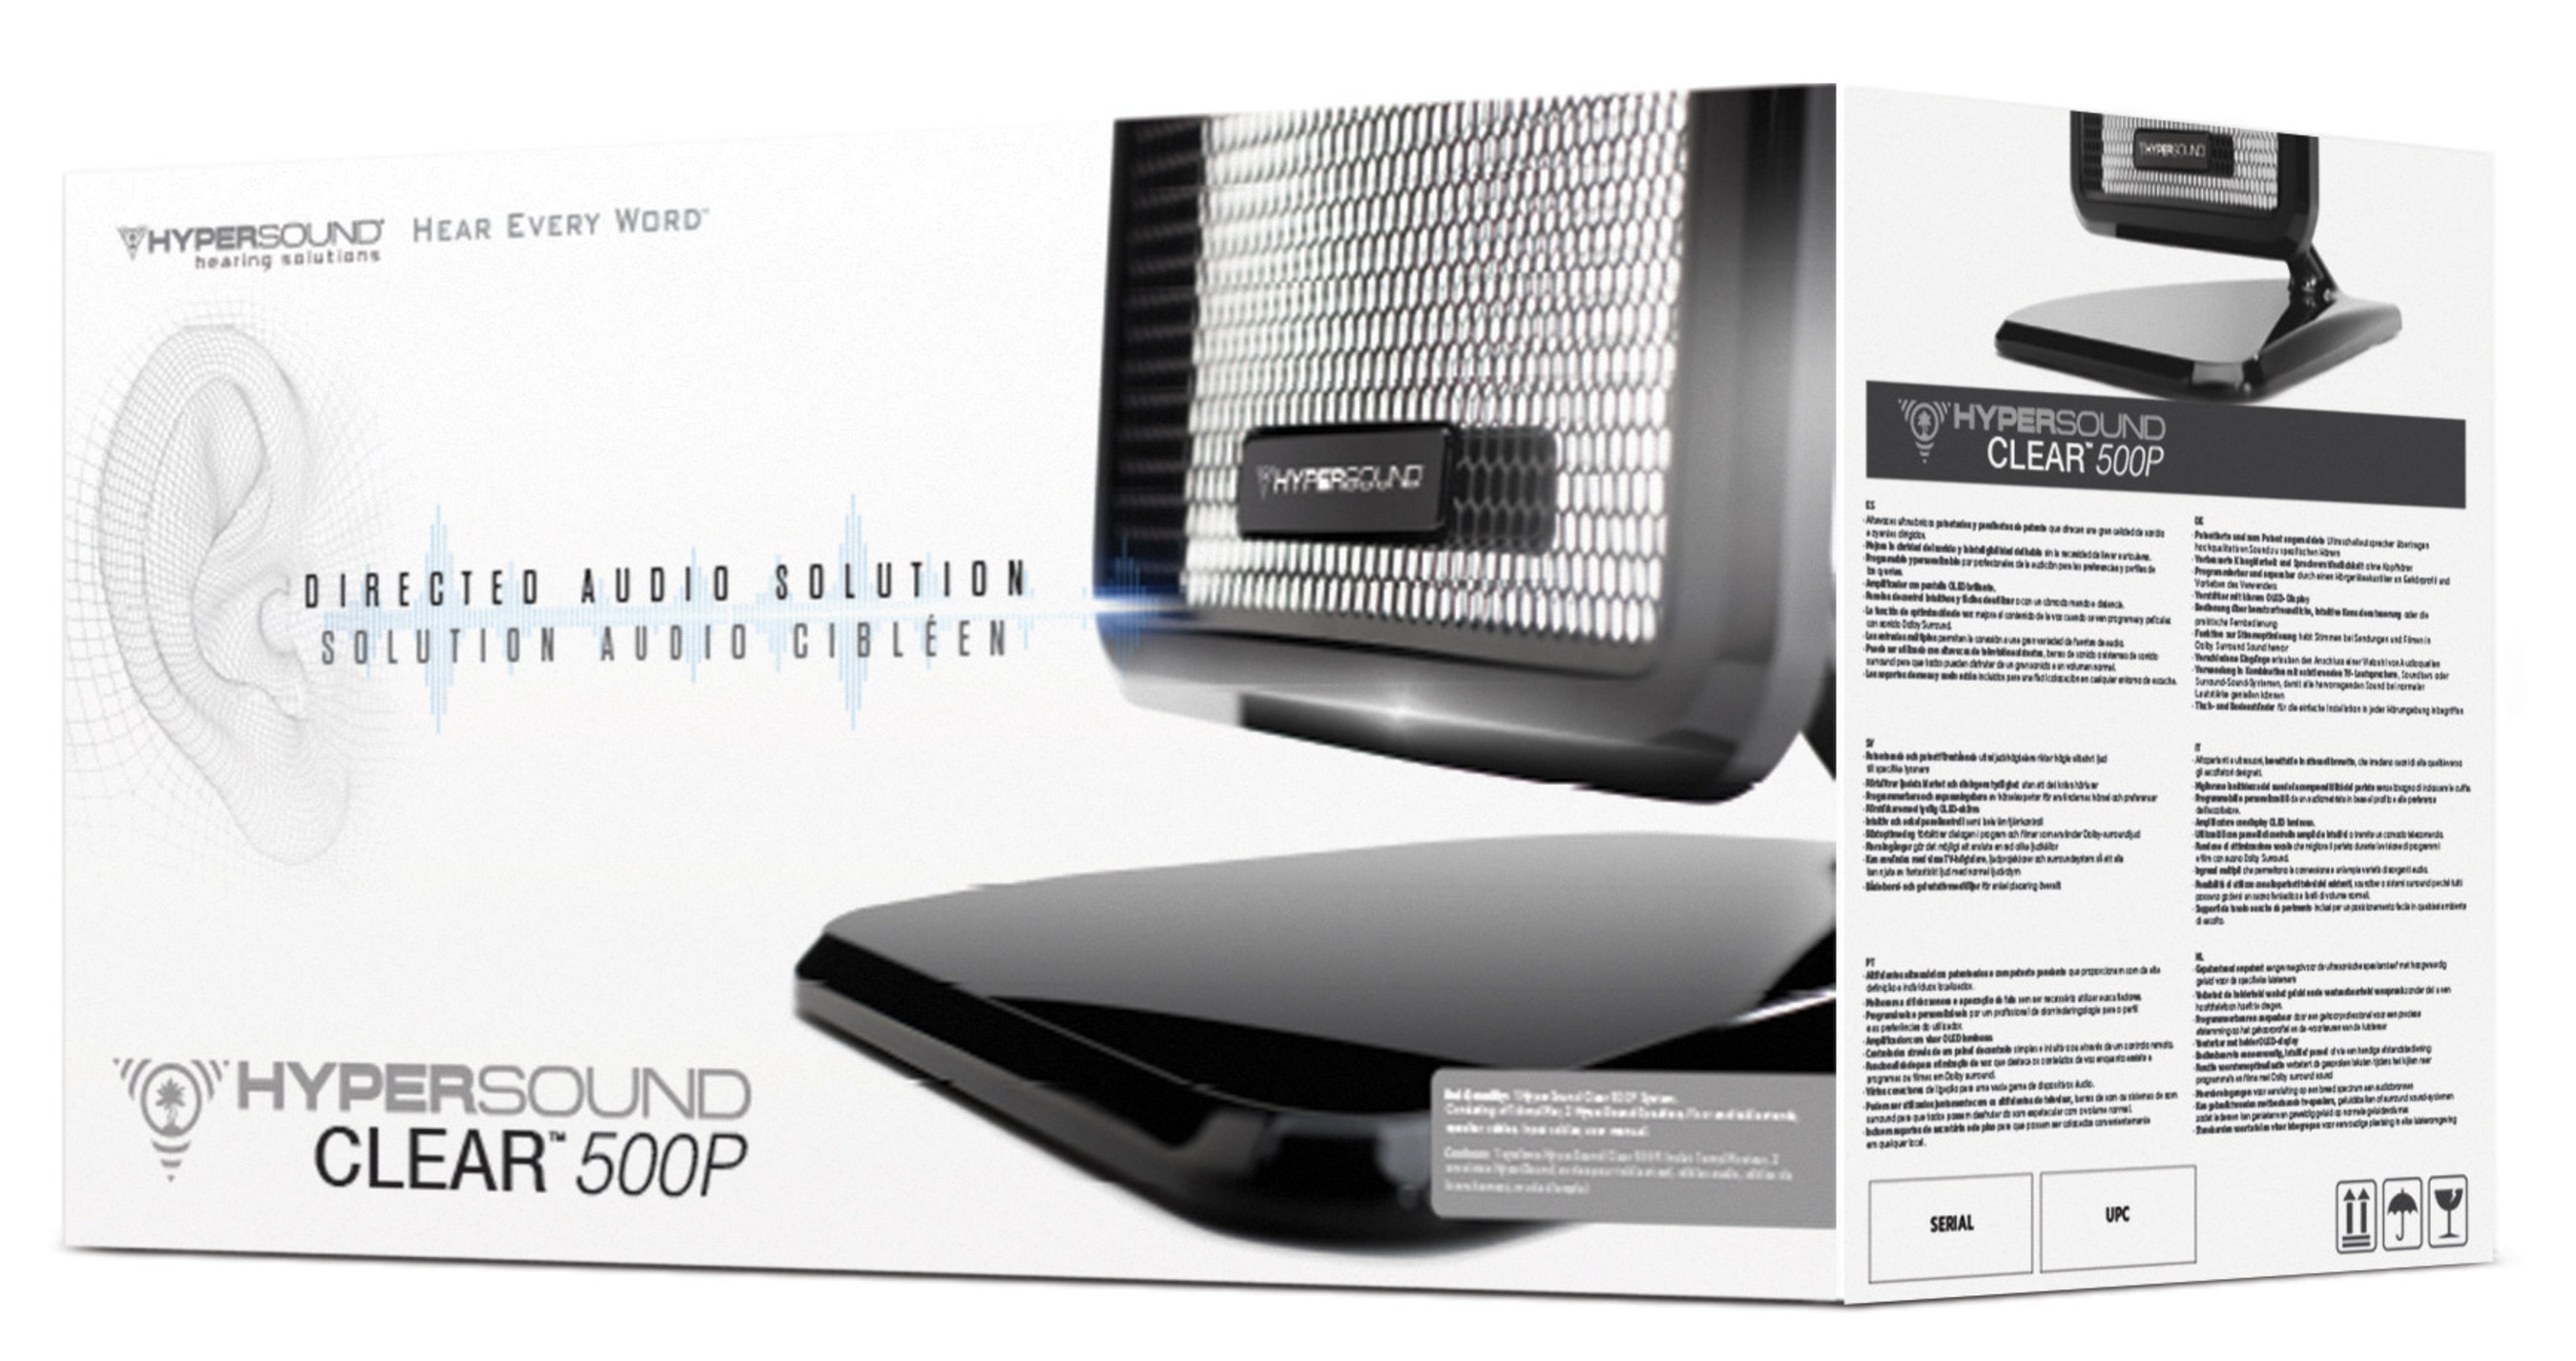 Turtle Beach's HyperSound Clear 500P directional audio system for the home helps people hear the TV better.